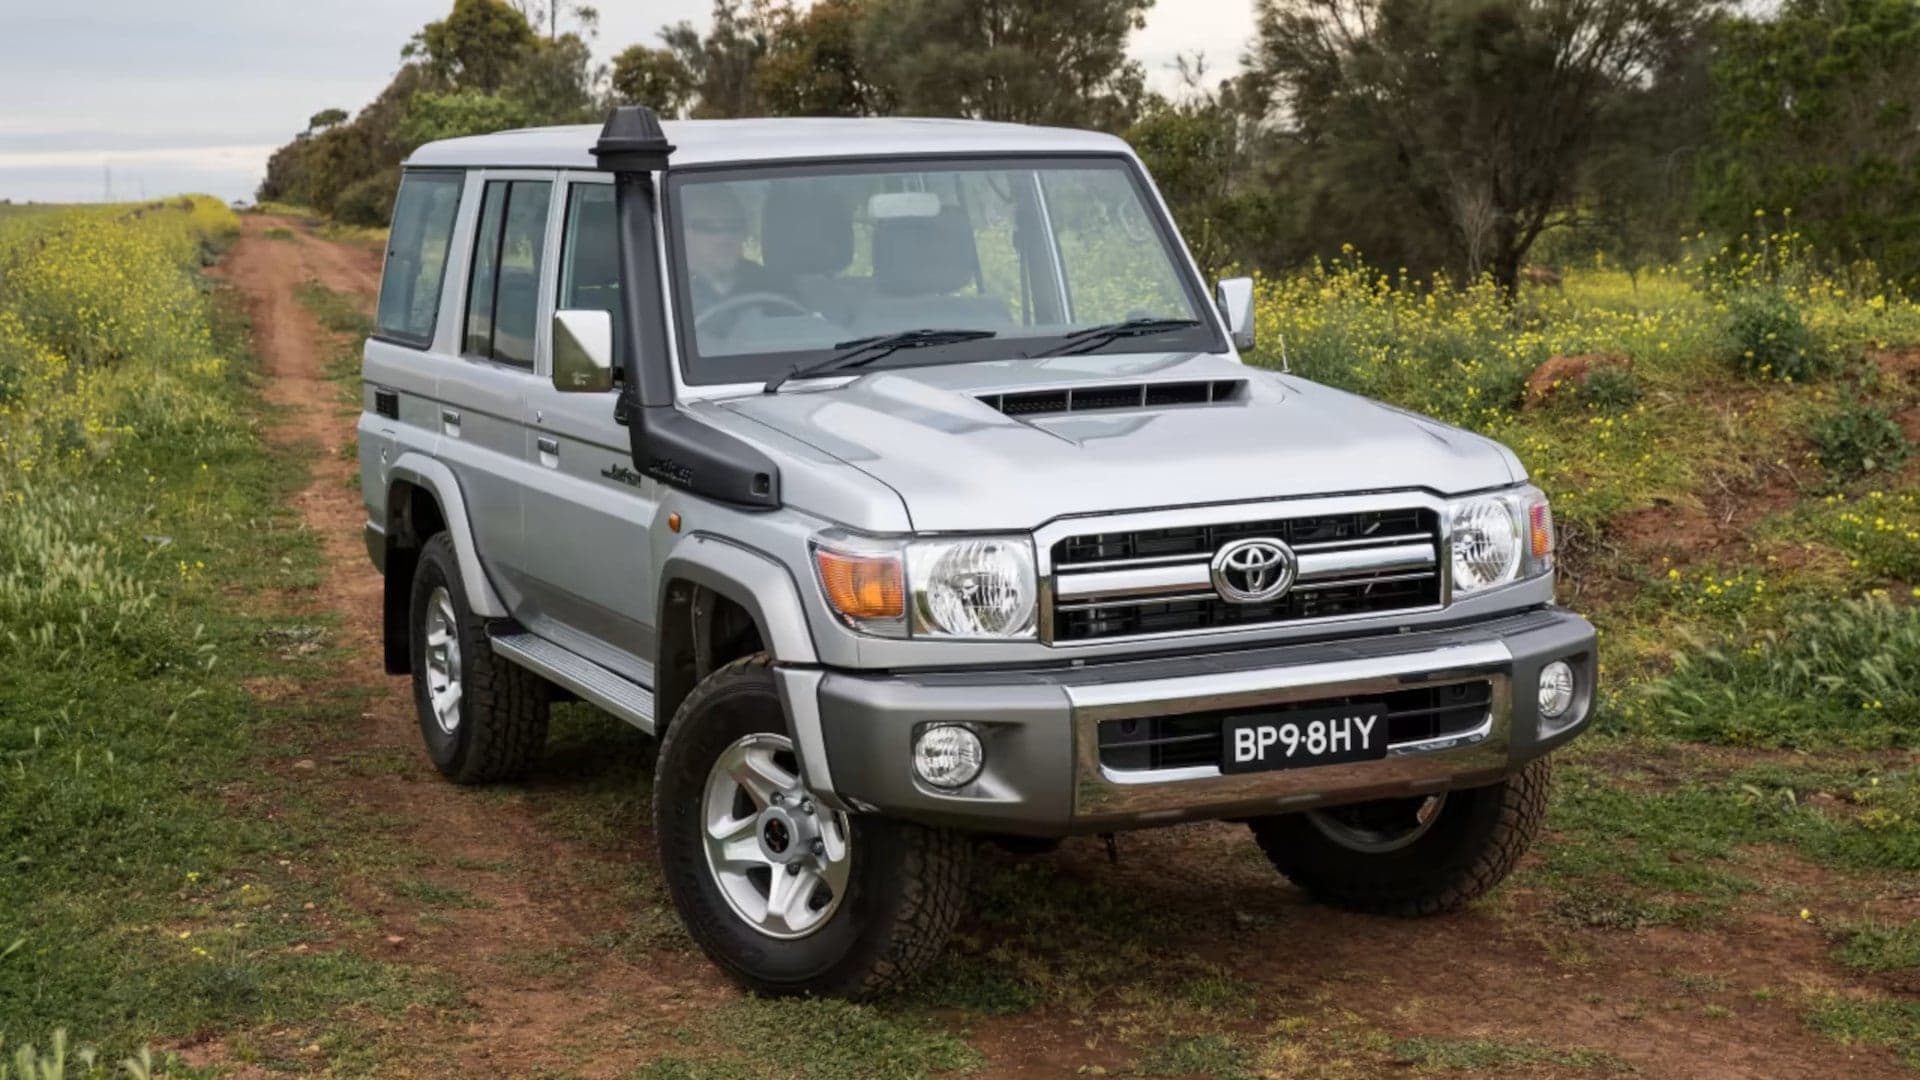 The 38-Year-Old 2022 Toyota Land Cruiser 70 Series Is the Oldest New Truck You Can Buy